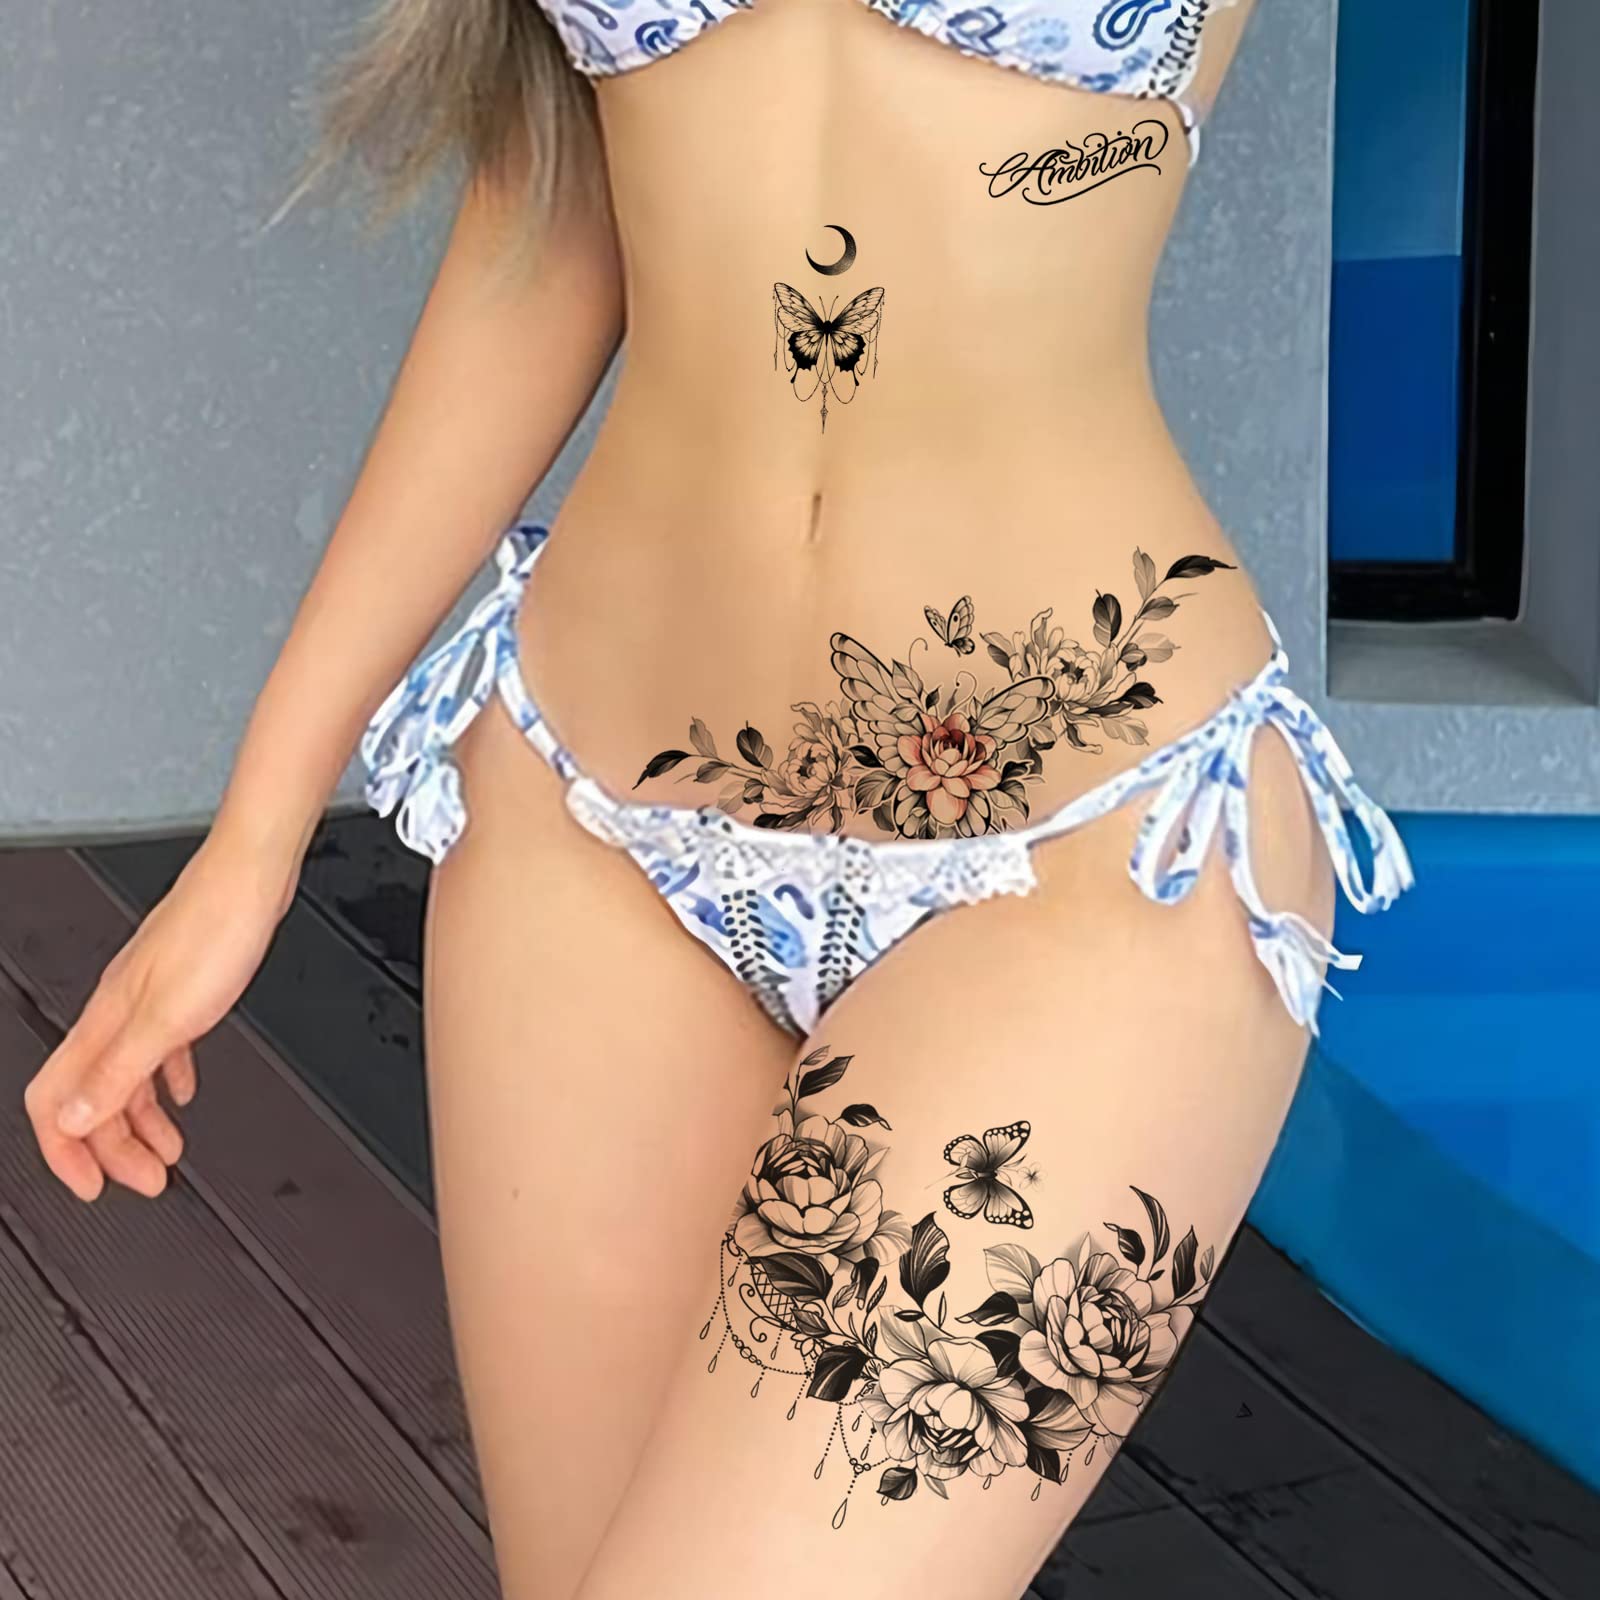 ROARHOWL sexy temporary tattoos for women,sexy tattoo kit, beautiful and exquisite,3D realistic flowers, butterflies, abdomen, chest, waist and back apply false tattoos for girl (Design 3)